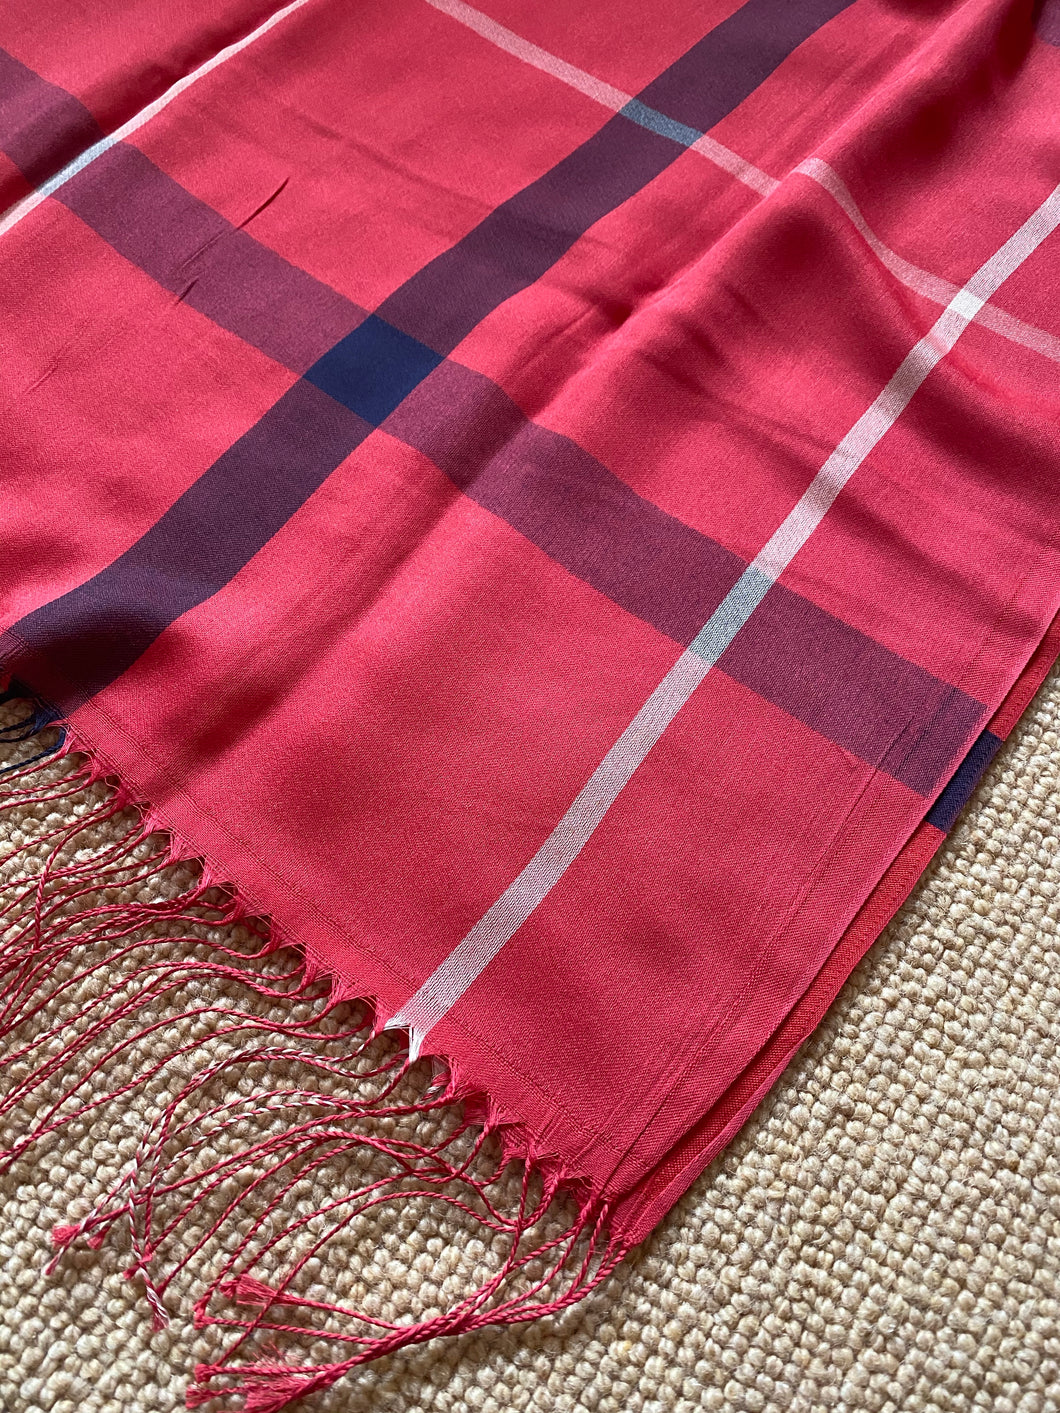 SU103 Striking, soft coral red and navy, burgundy large check scarf